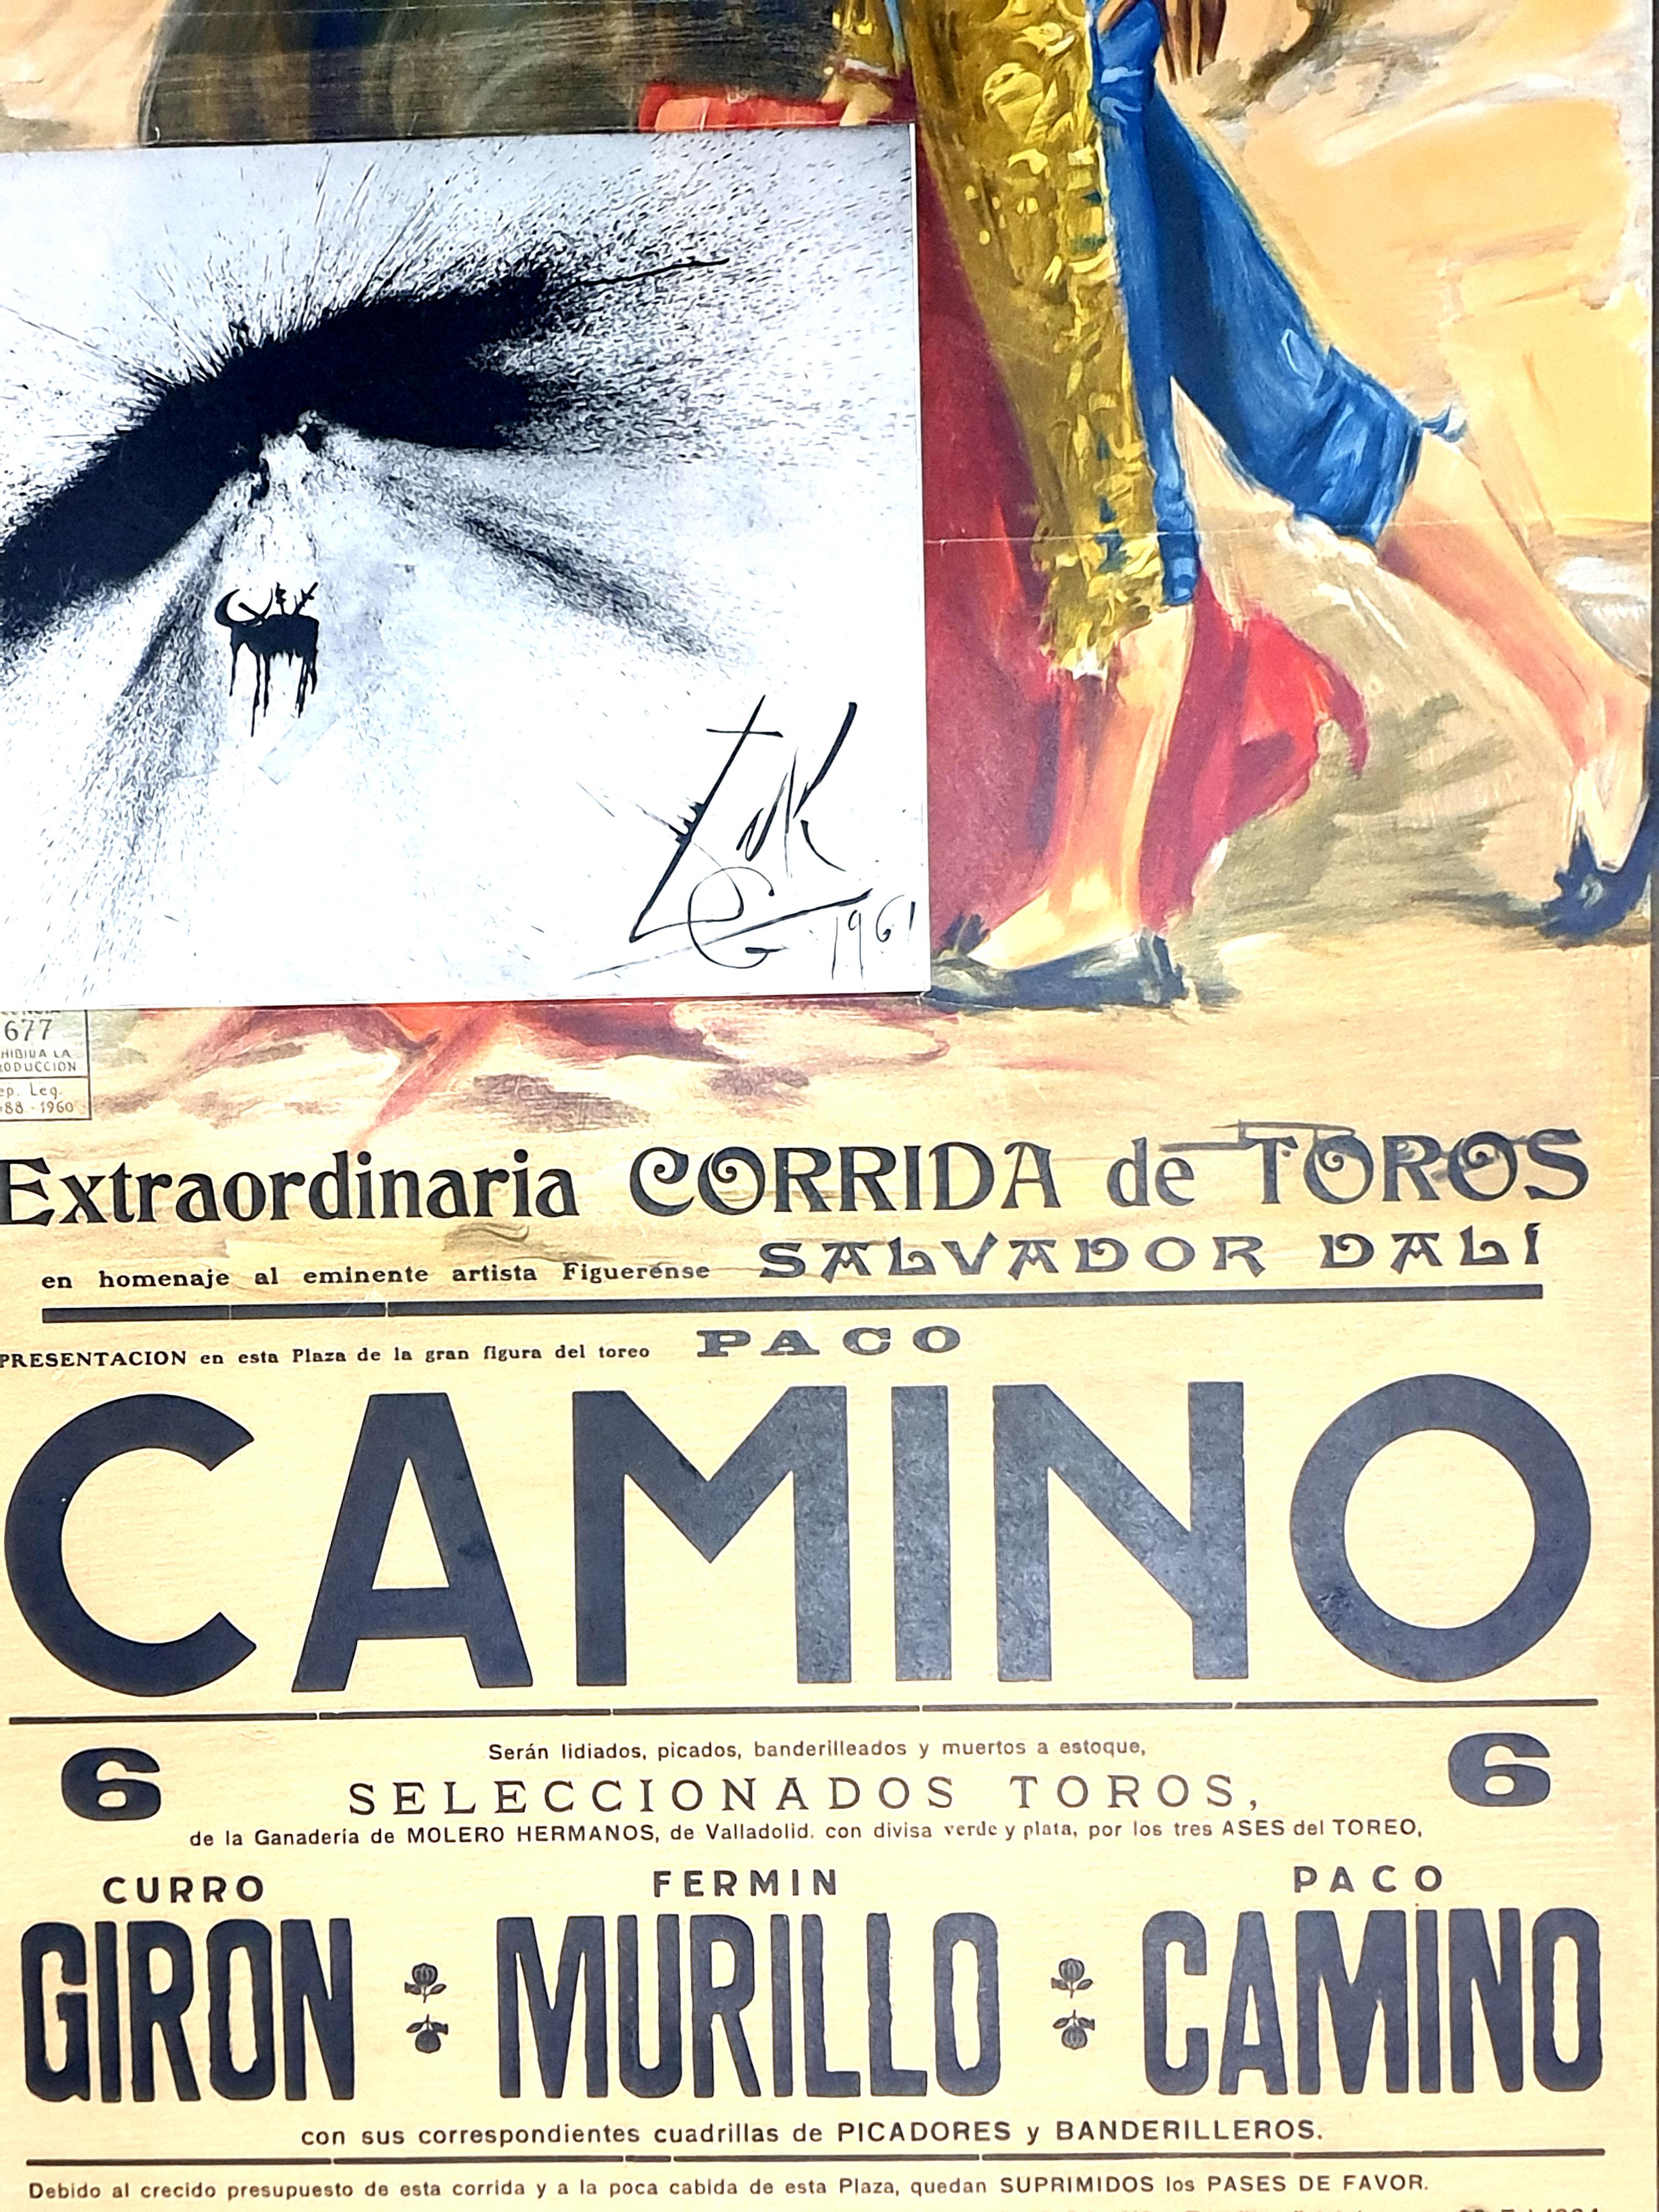 Salvador Dali - Corrida - Vintage Poster with Etching
Etching made behind a menu in Restautant Duran as a tribute dinner to Salvador Dali and his wife Gala Dali in figueres Spain, August 12, 1961.
Dimensions: 105 x 55 cm
1961
Very rare
Provenance :